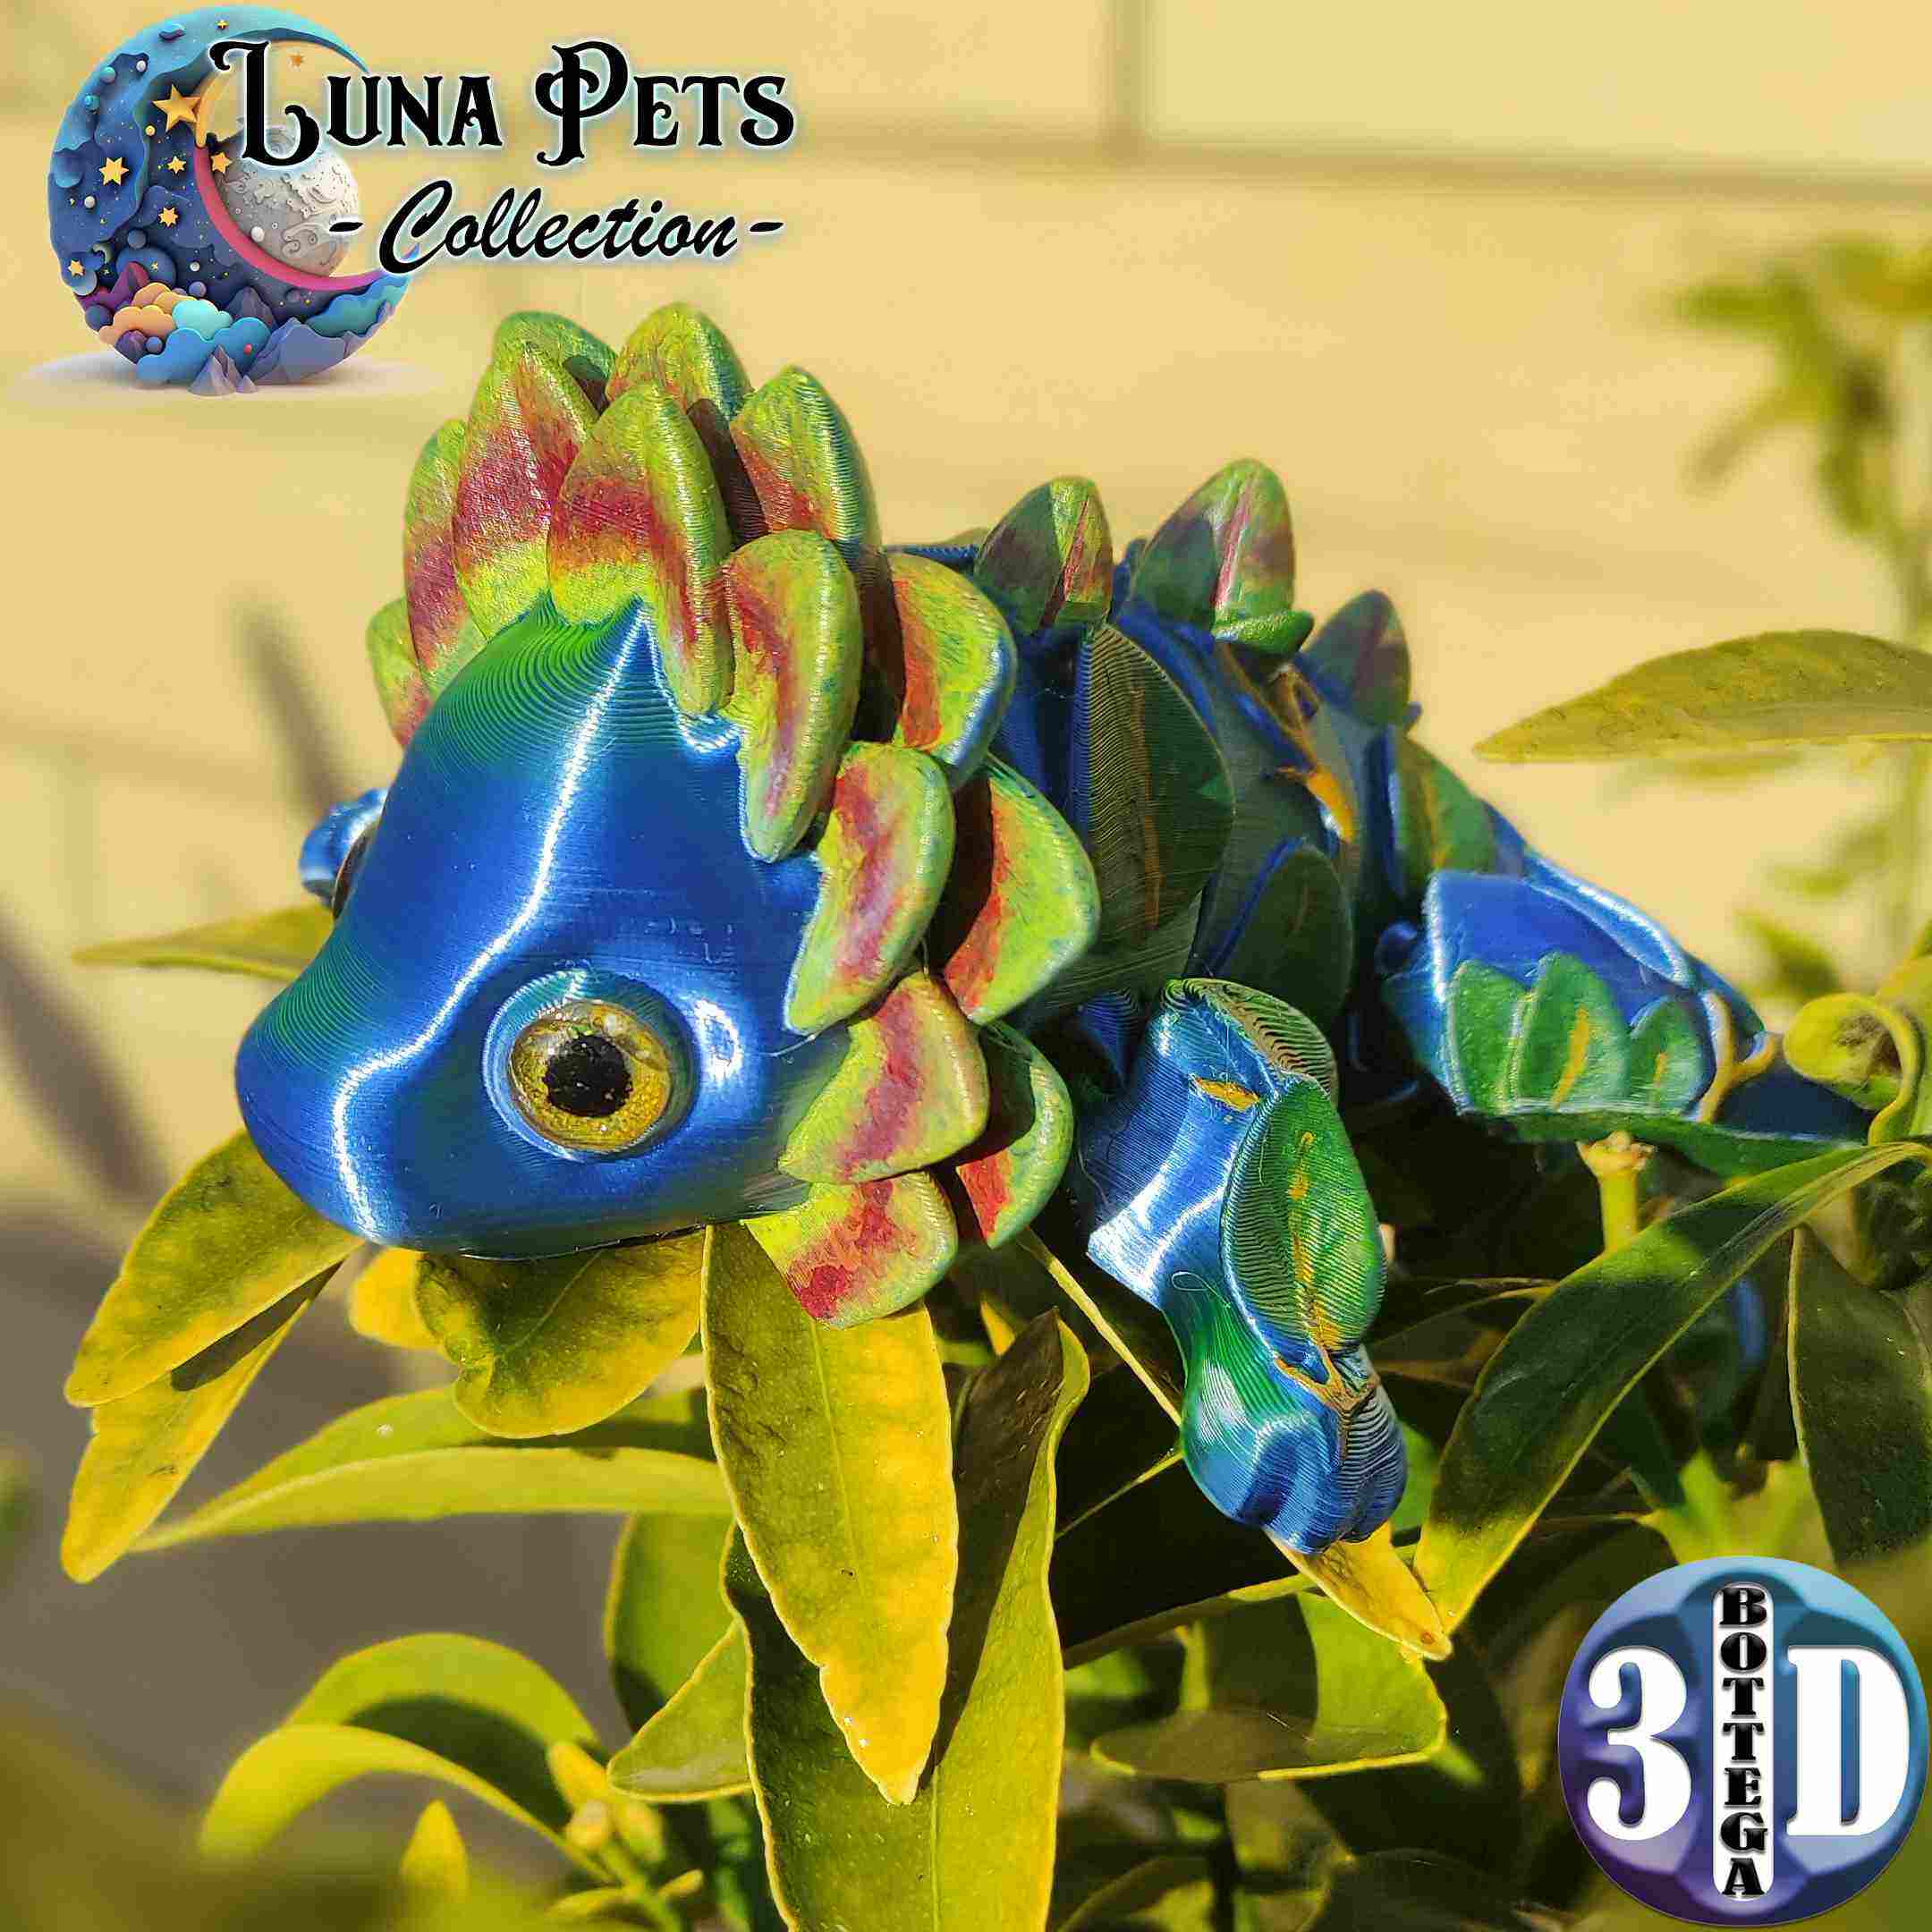 LUNA PETS COLLECTION - Sunflowern - articulated baby dragon-1